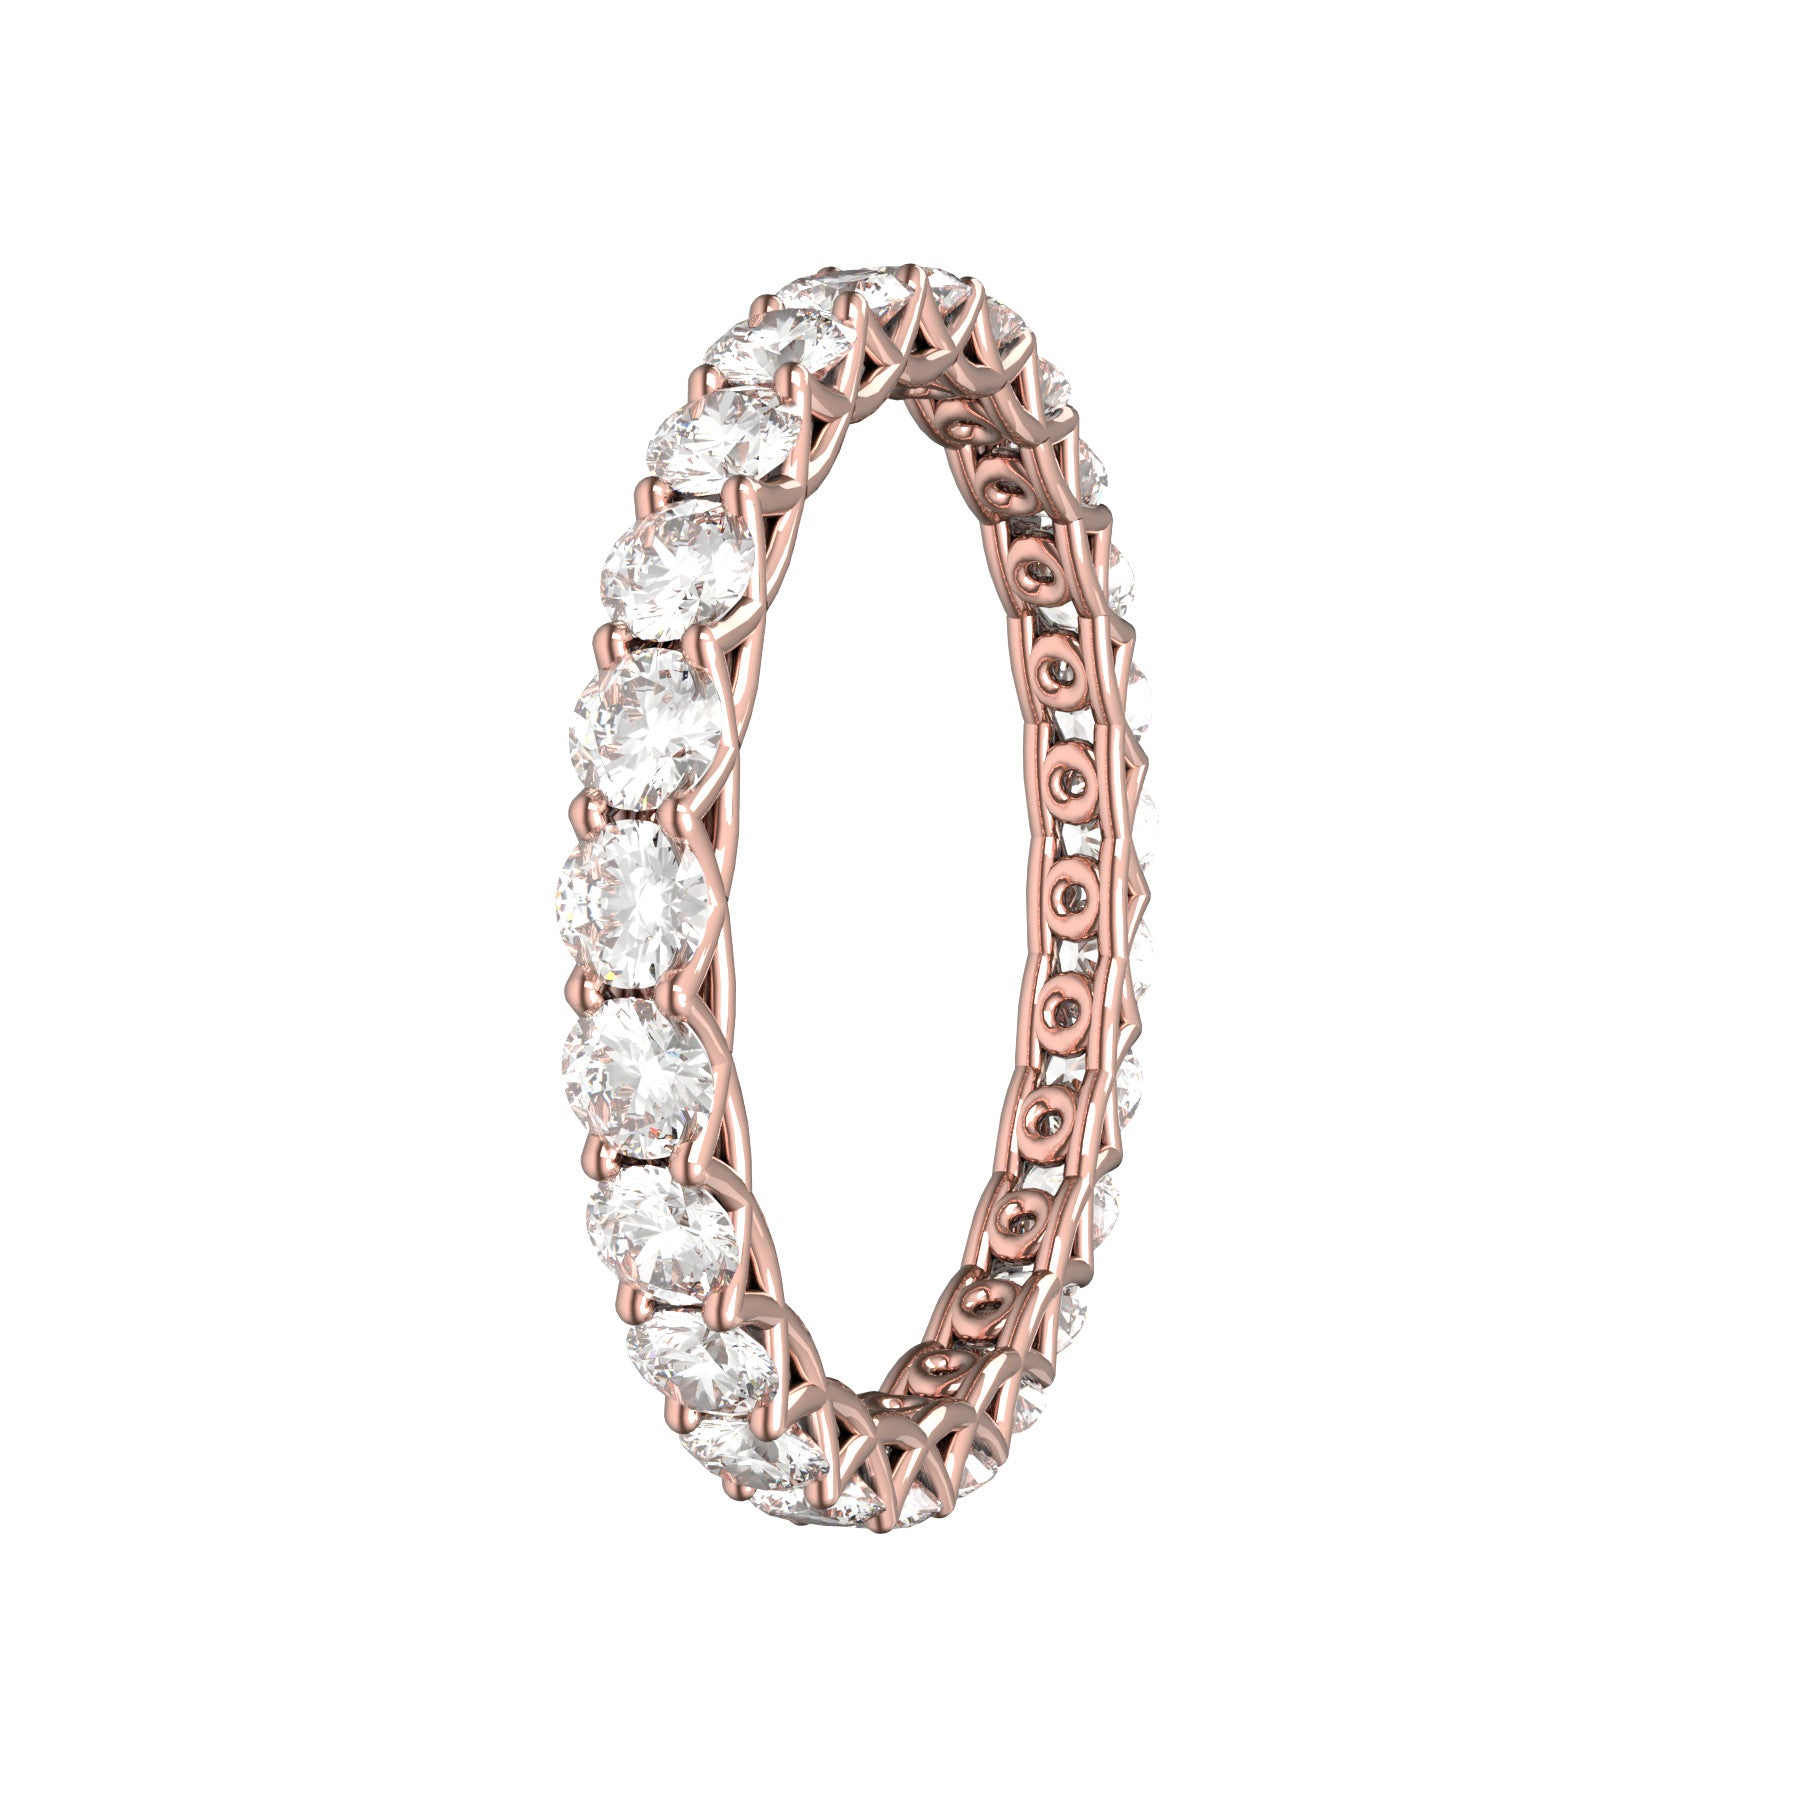 sweet hearts wedding band, 18 K pink gold, 0,05 natural diamonds, weight about 1,40 g. (0.05 oz), width 2,40 mm